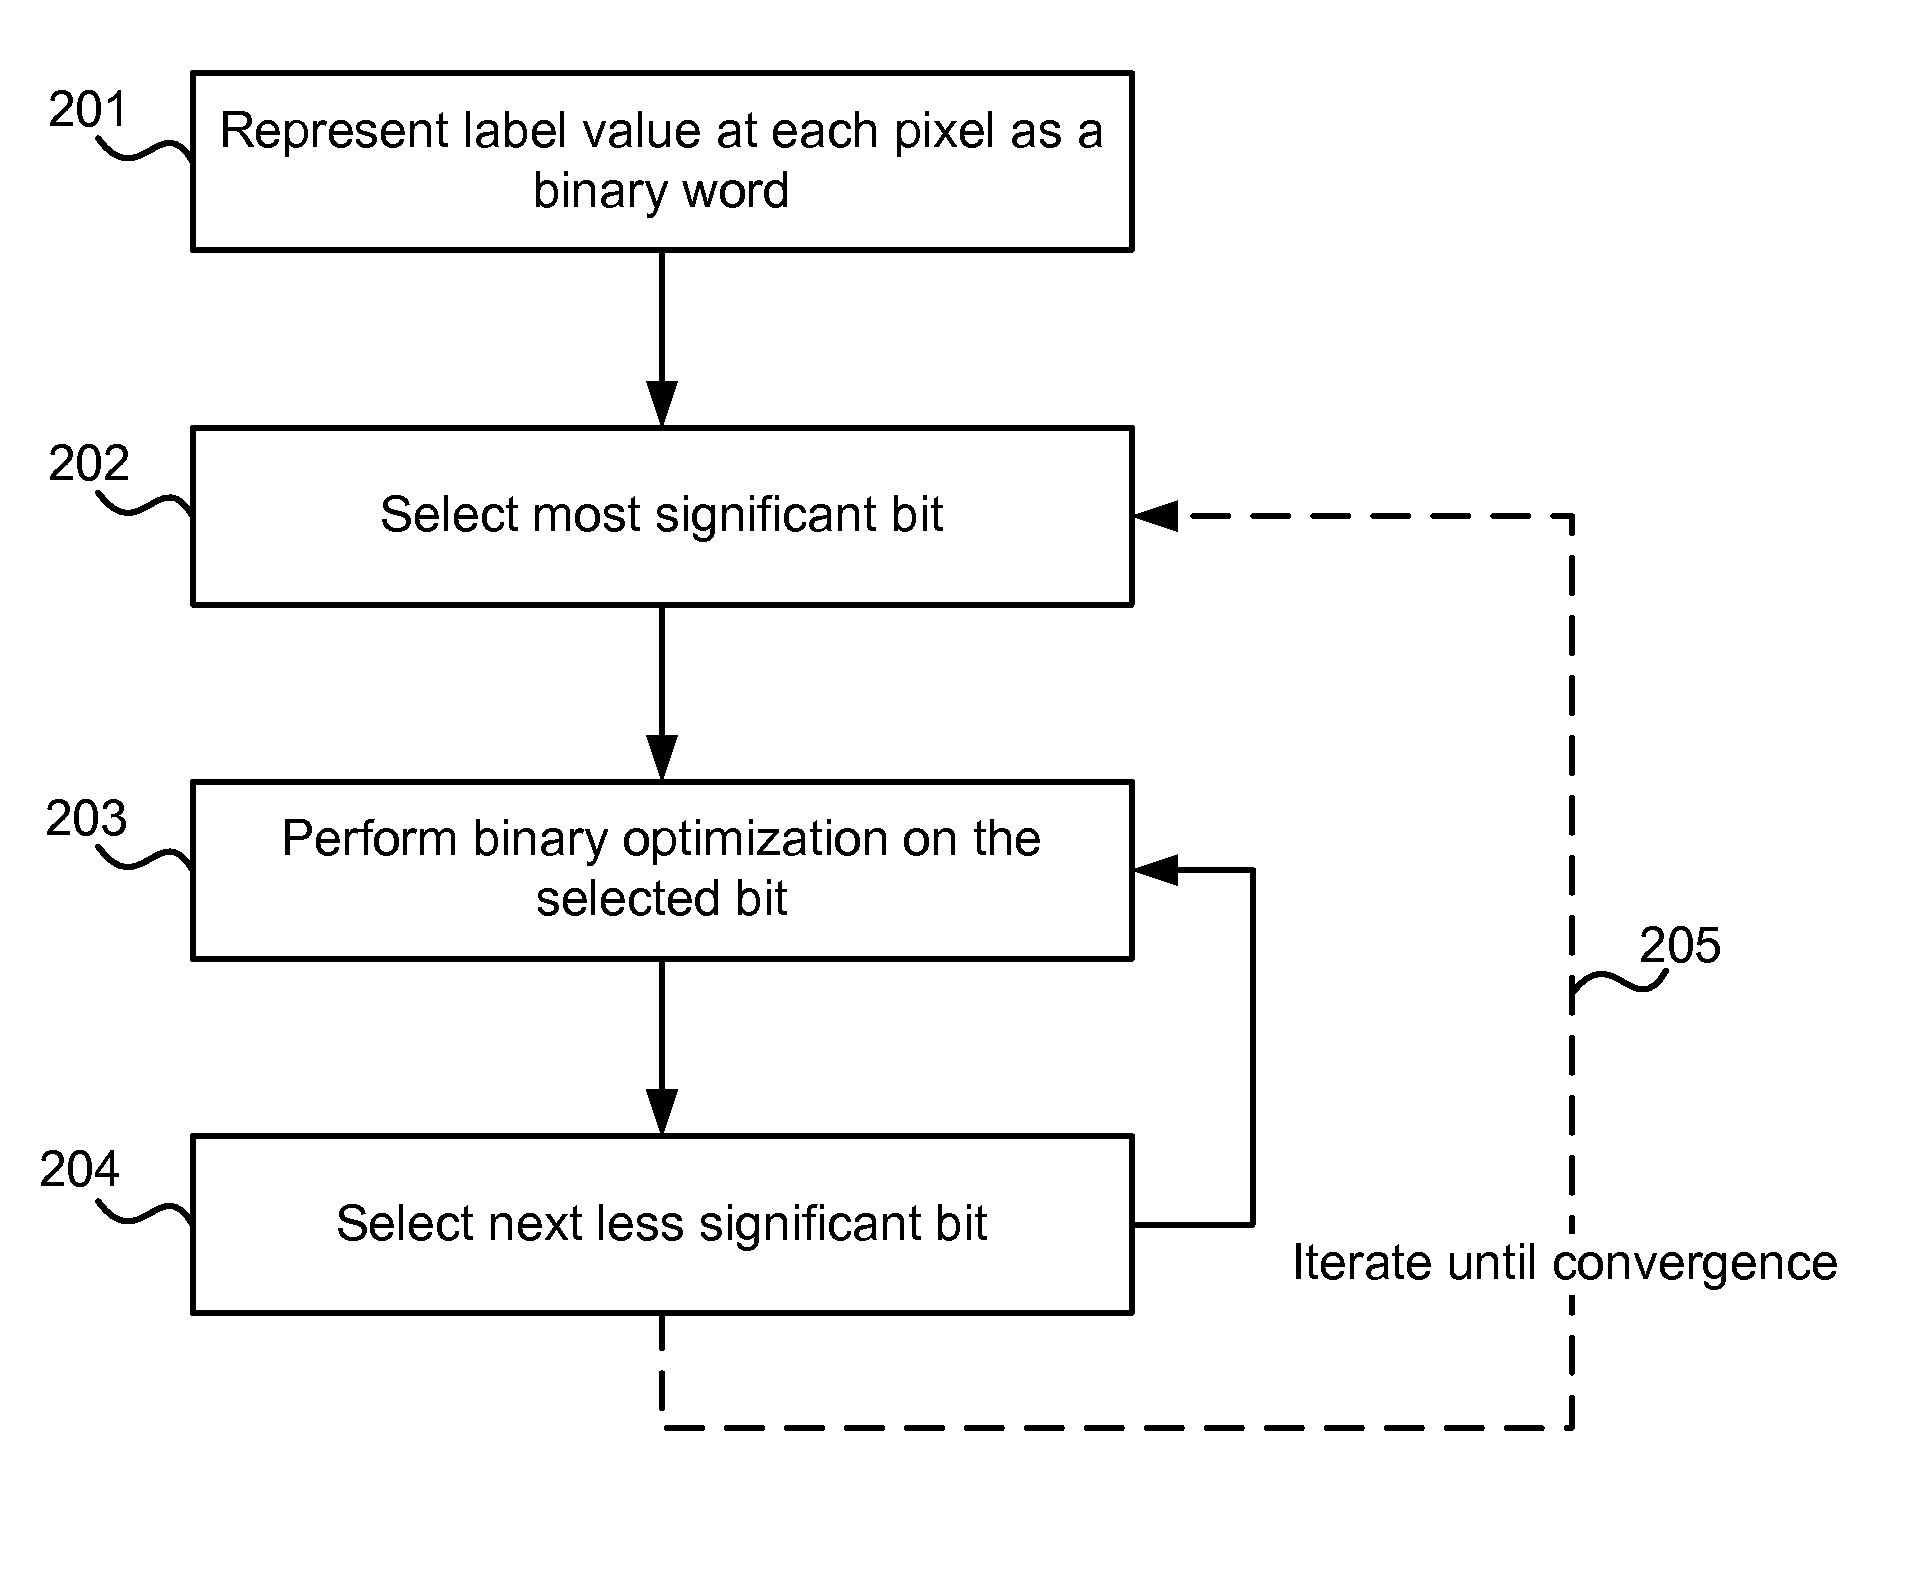 Optimization of multi-label problems in computer vision